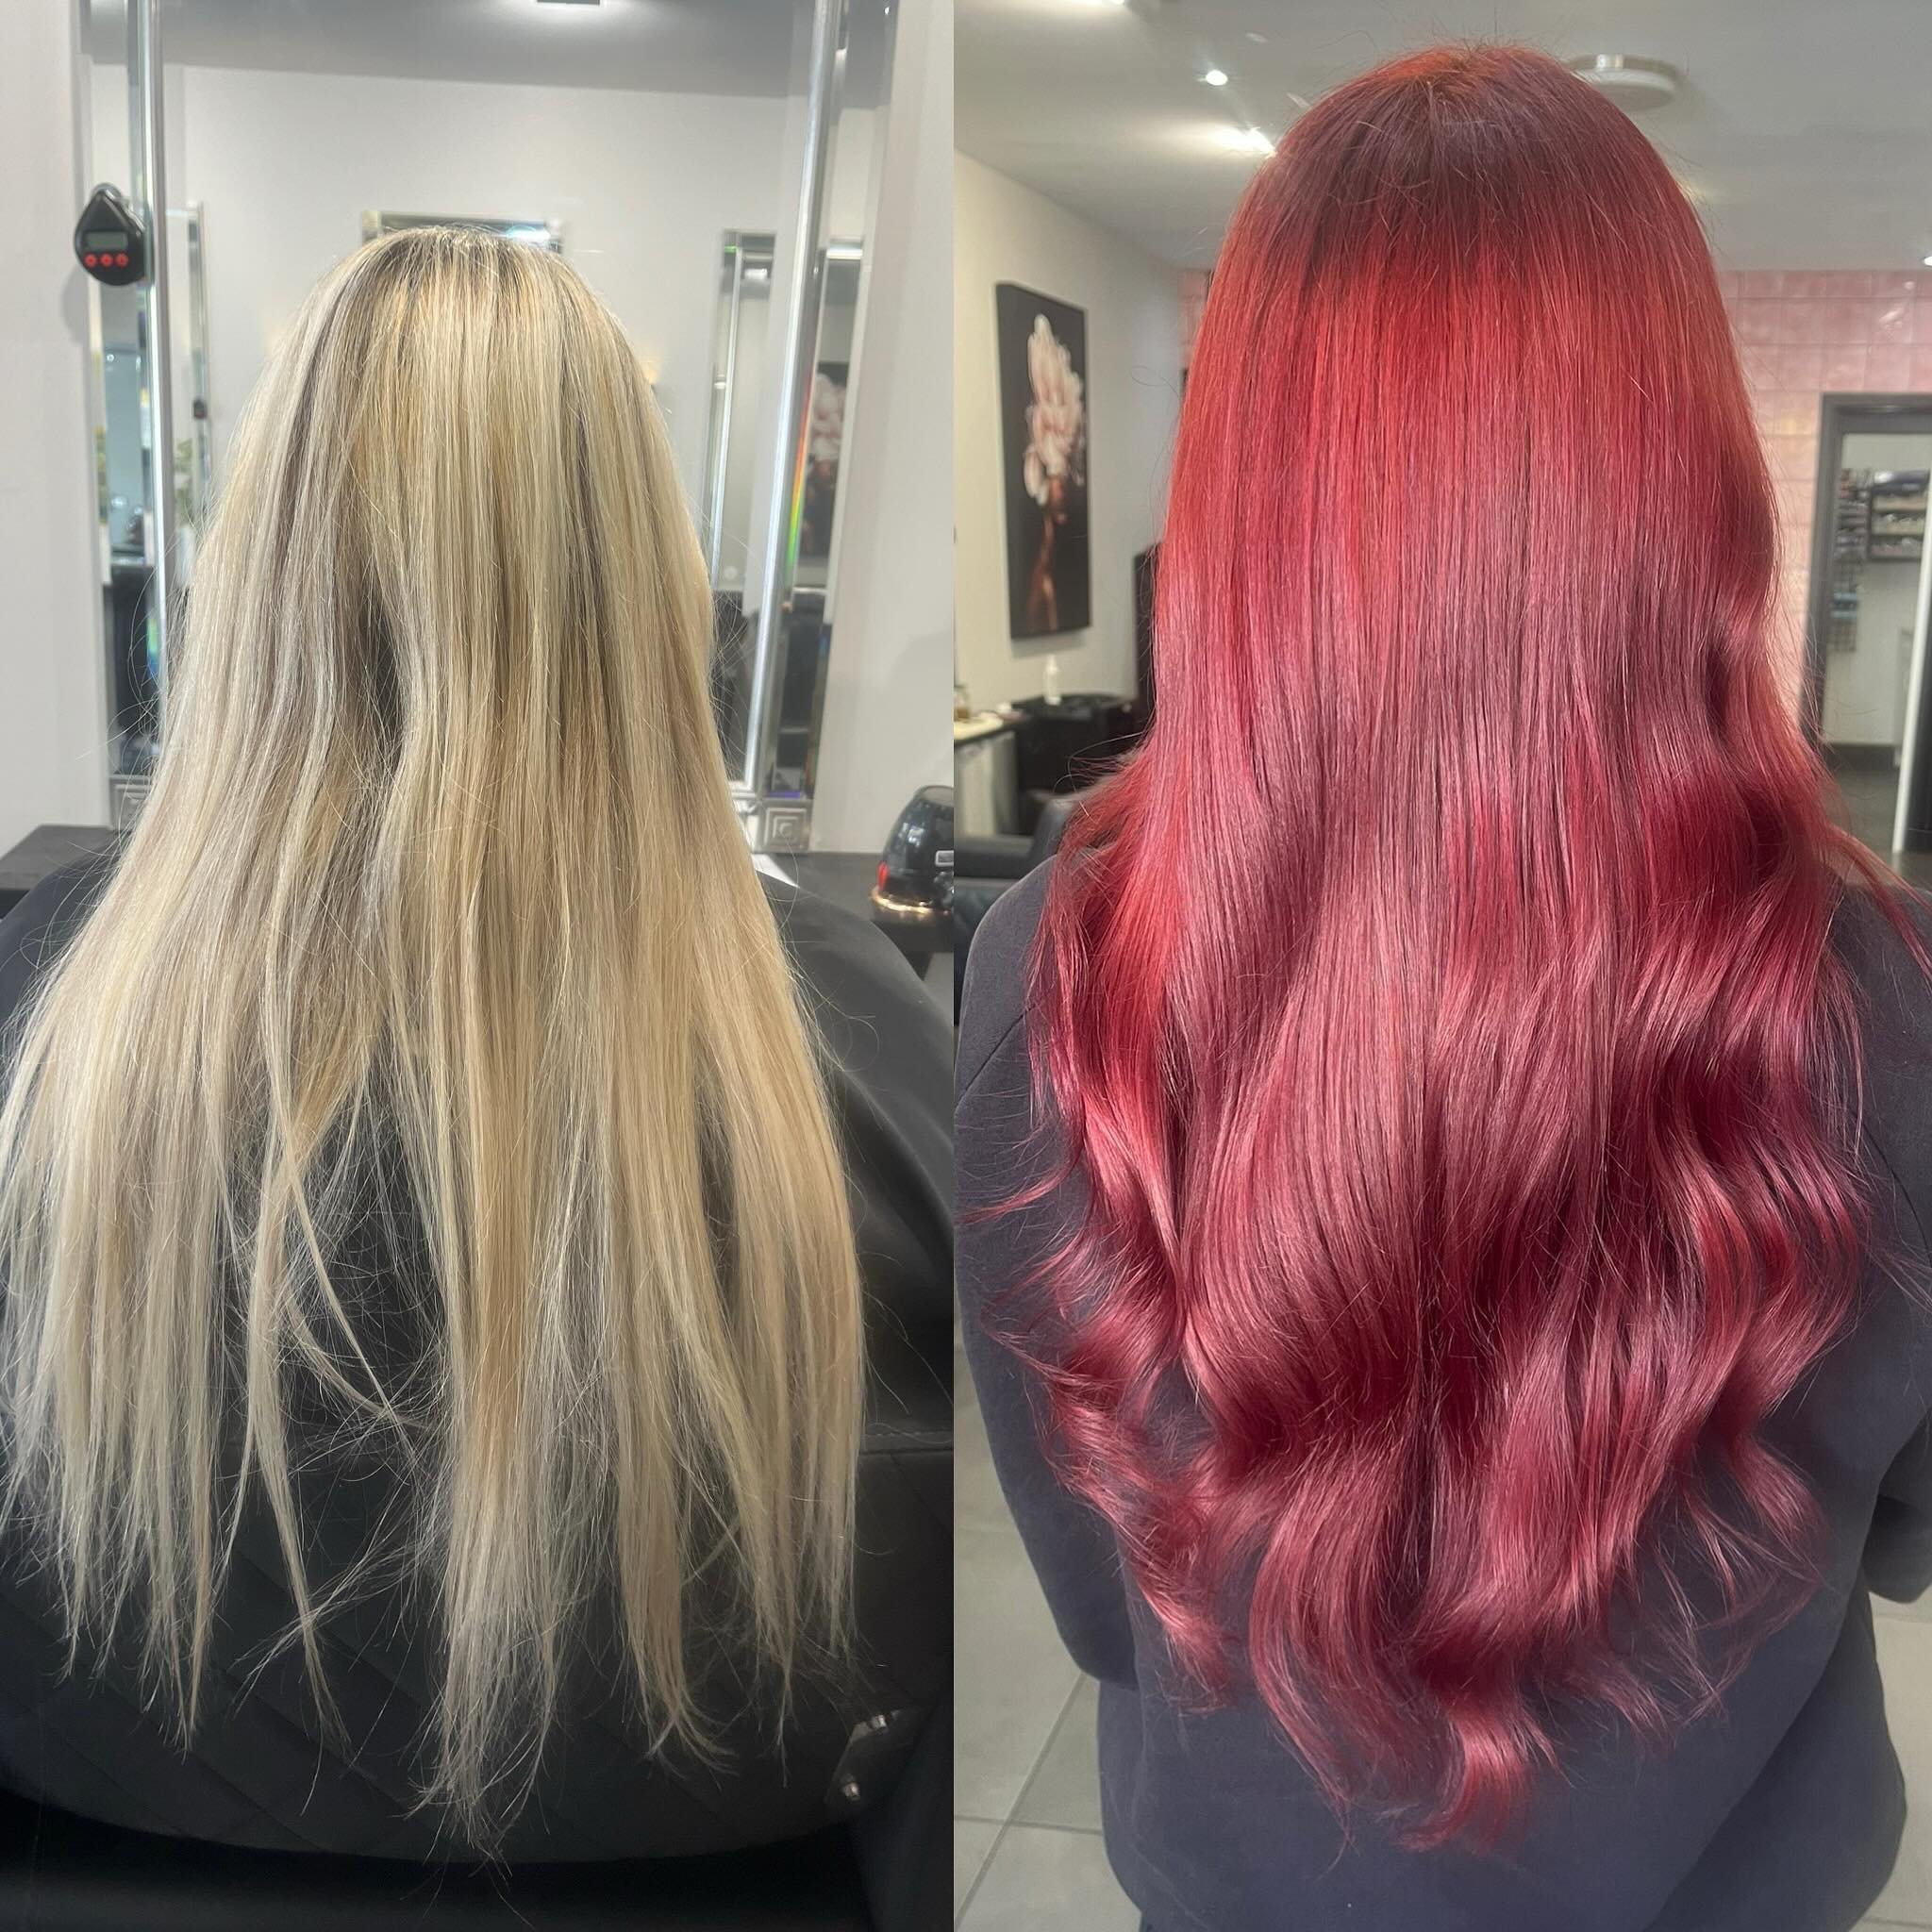 From blonde to deep red we love love love this colour change hair by @sketchyeskimo